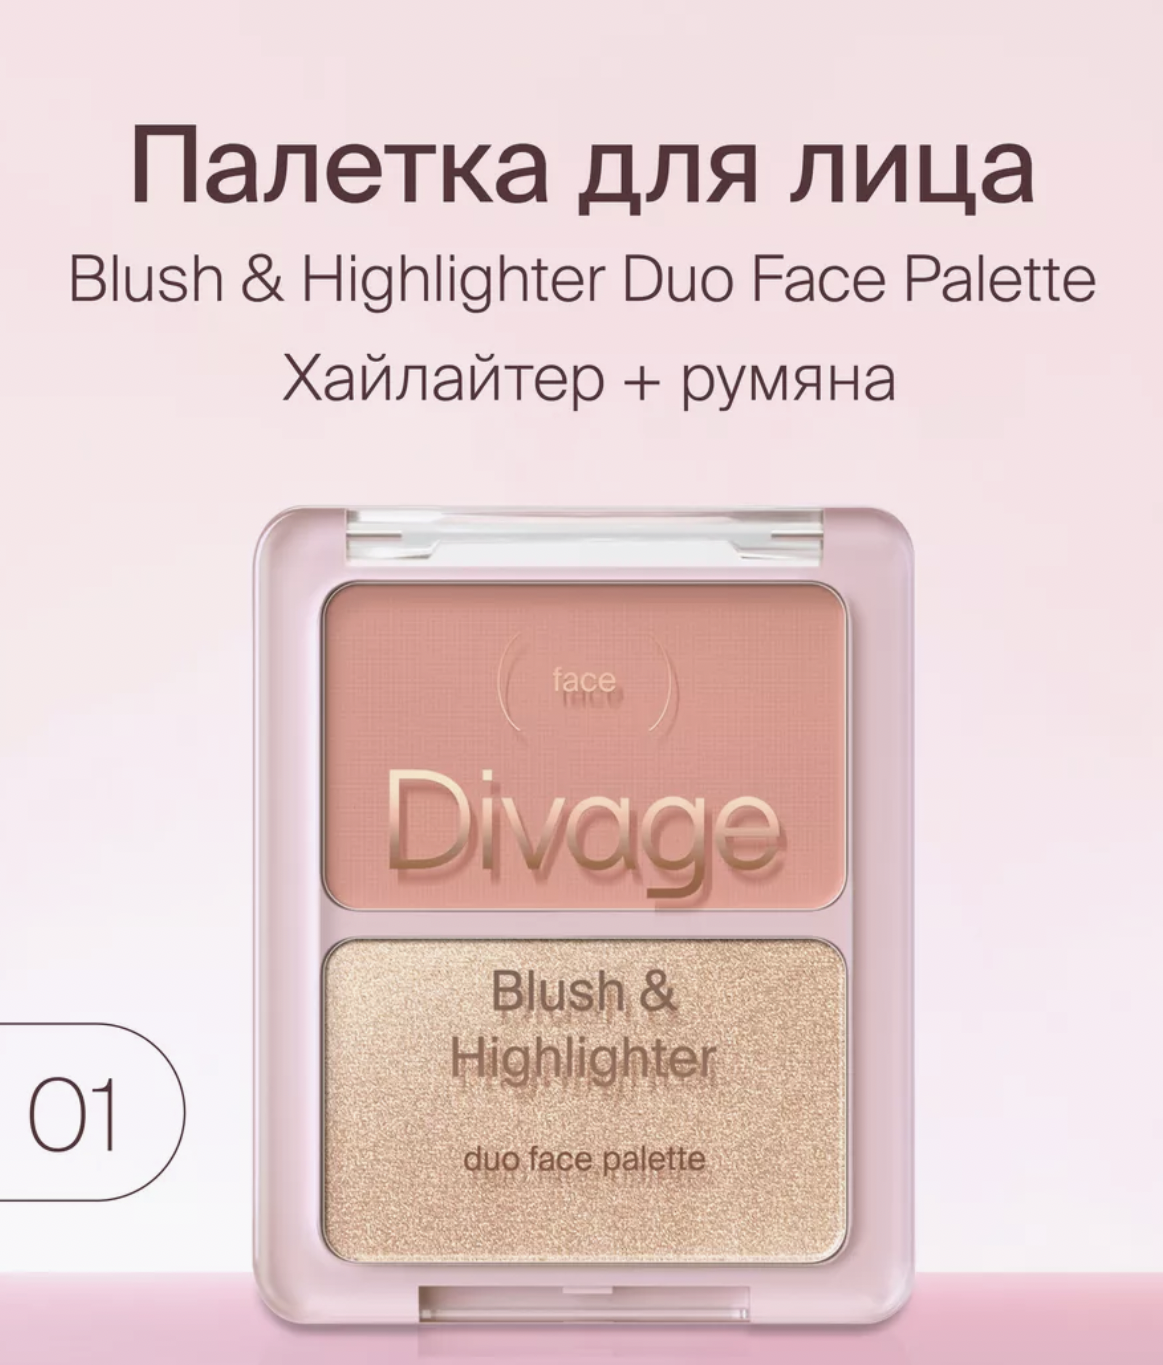   / Divage -    Blush&Highlighter Duo Face Palette  01, 8 